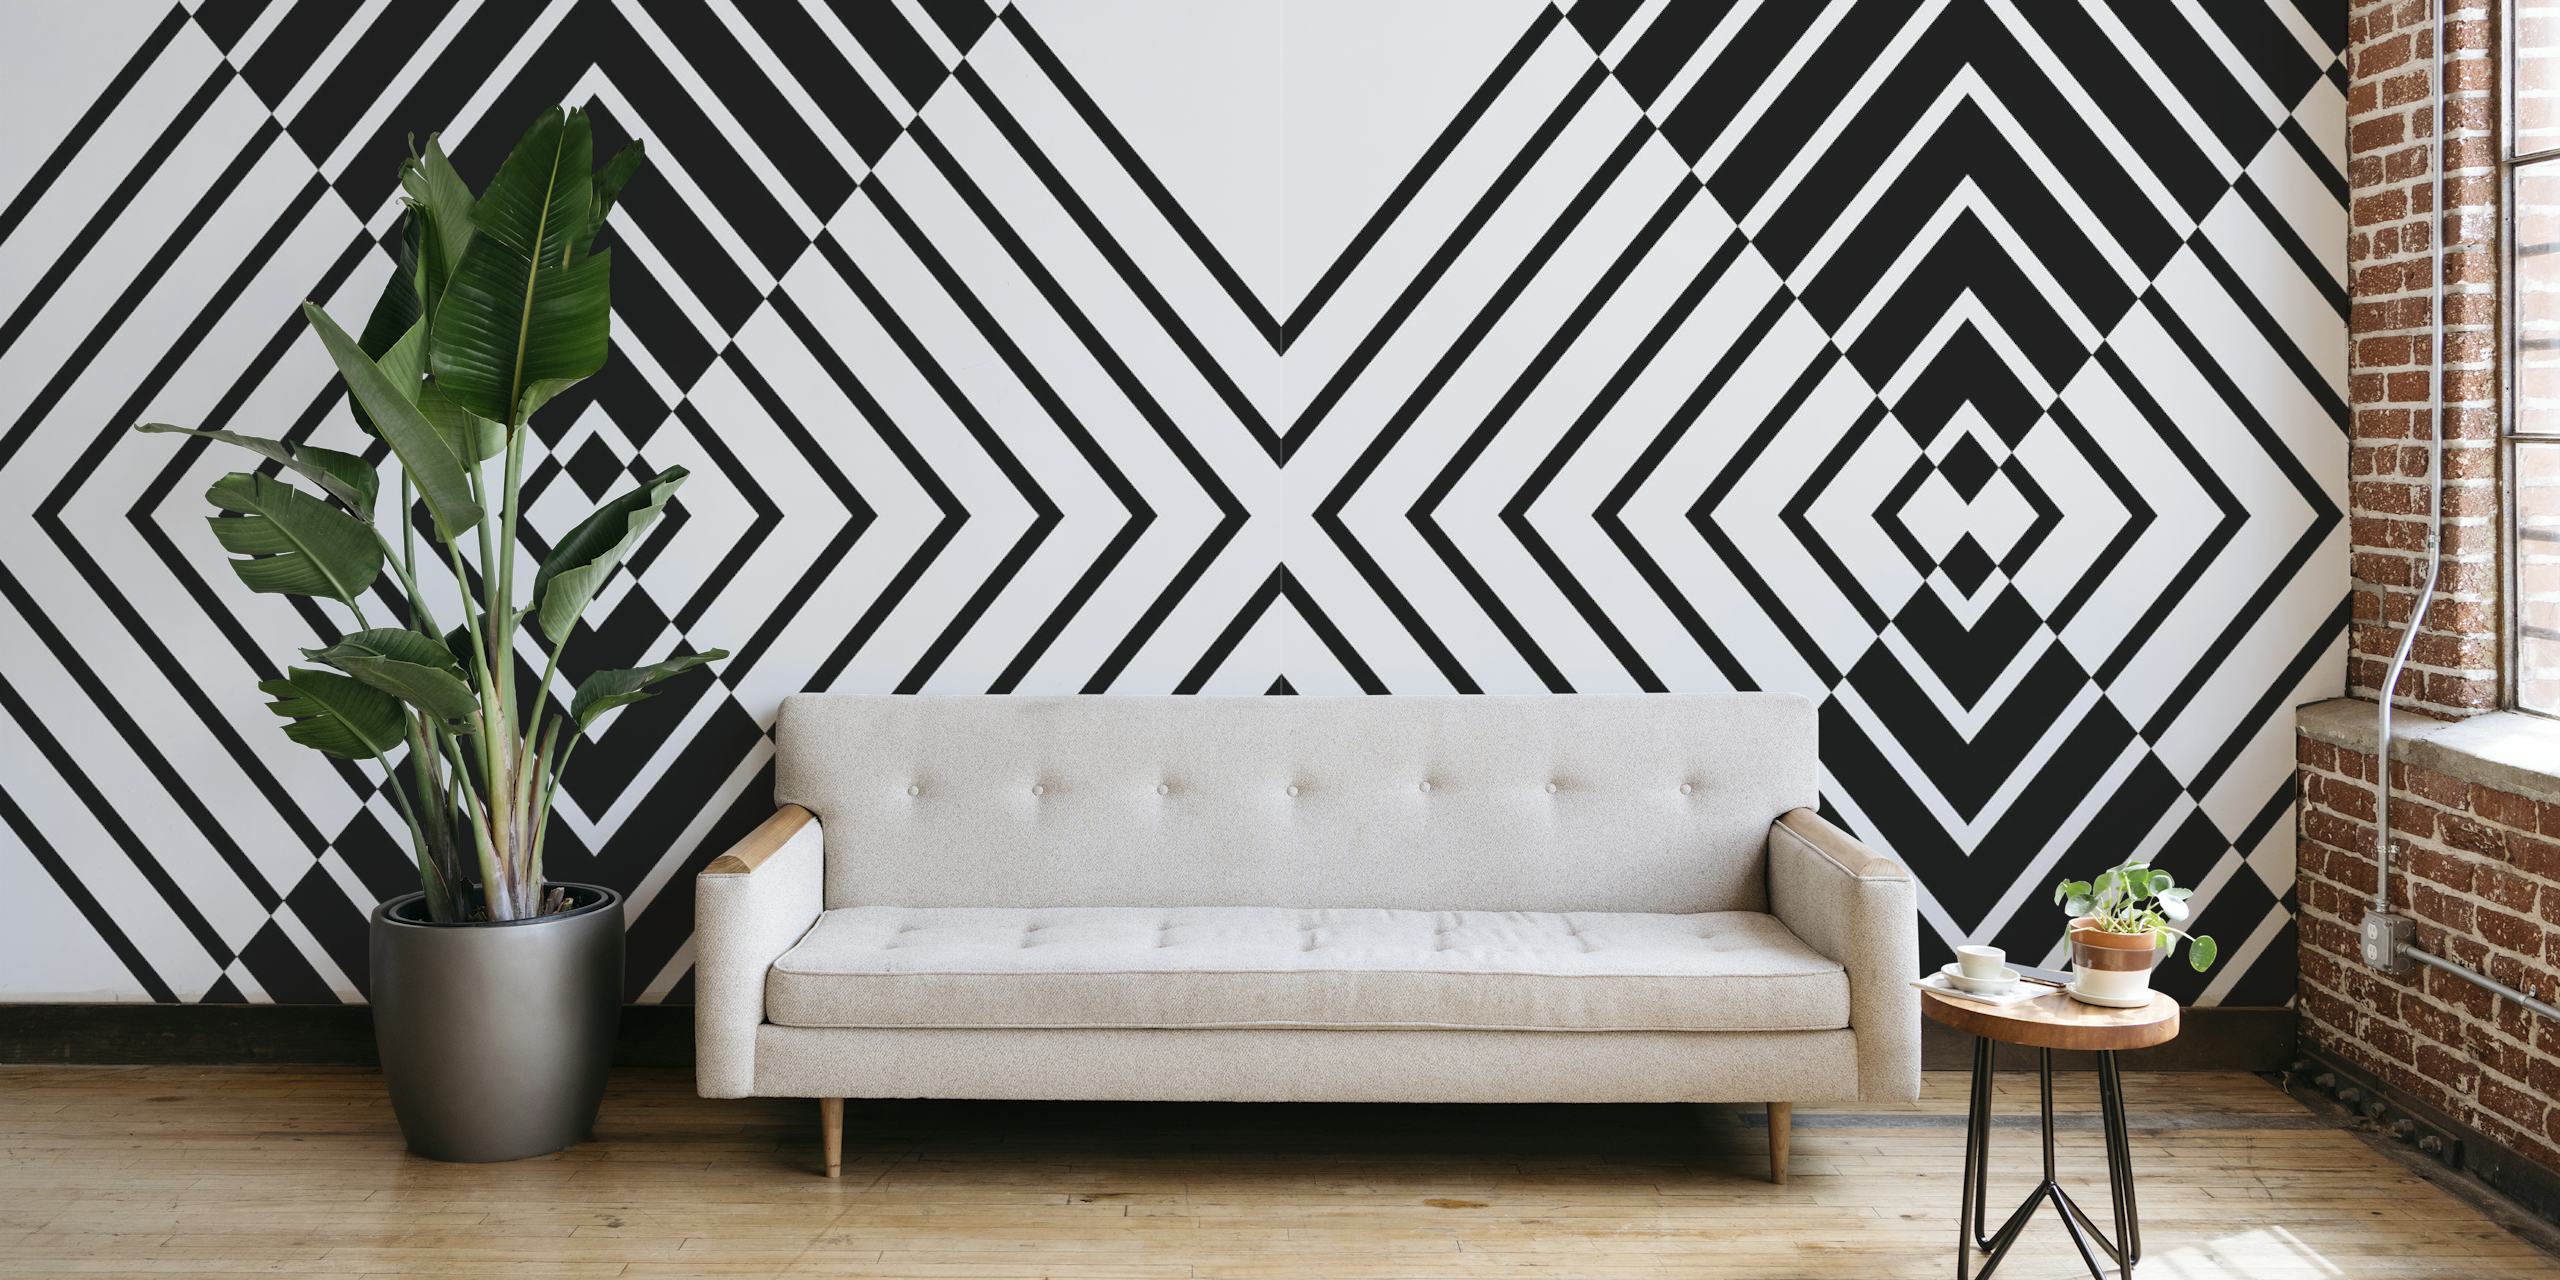 Black and white geometric pattern wall mural creating a bold abstract design